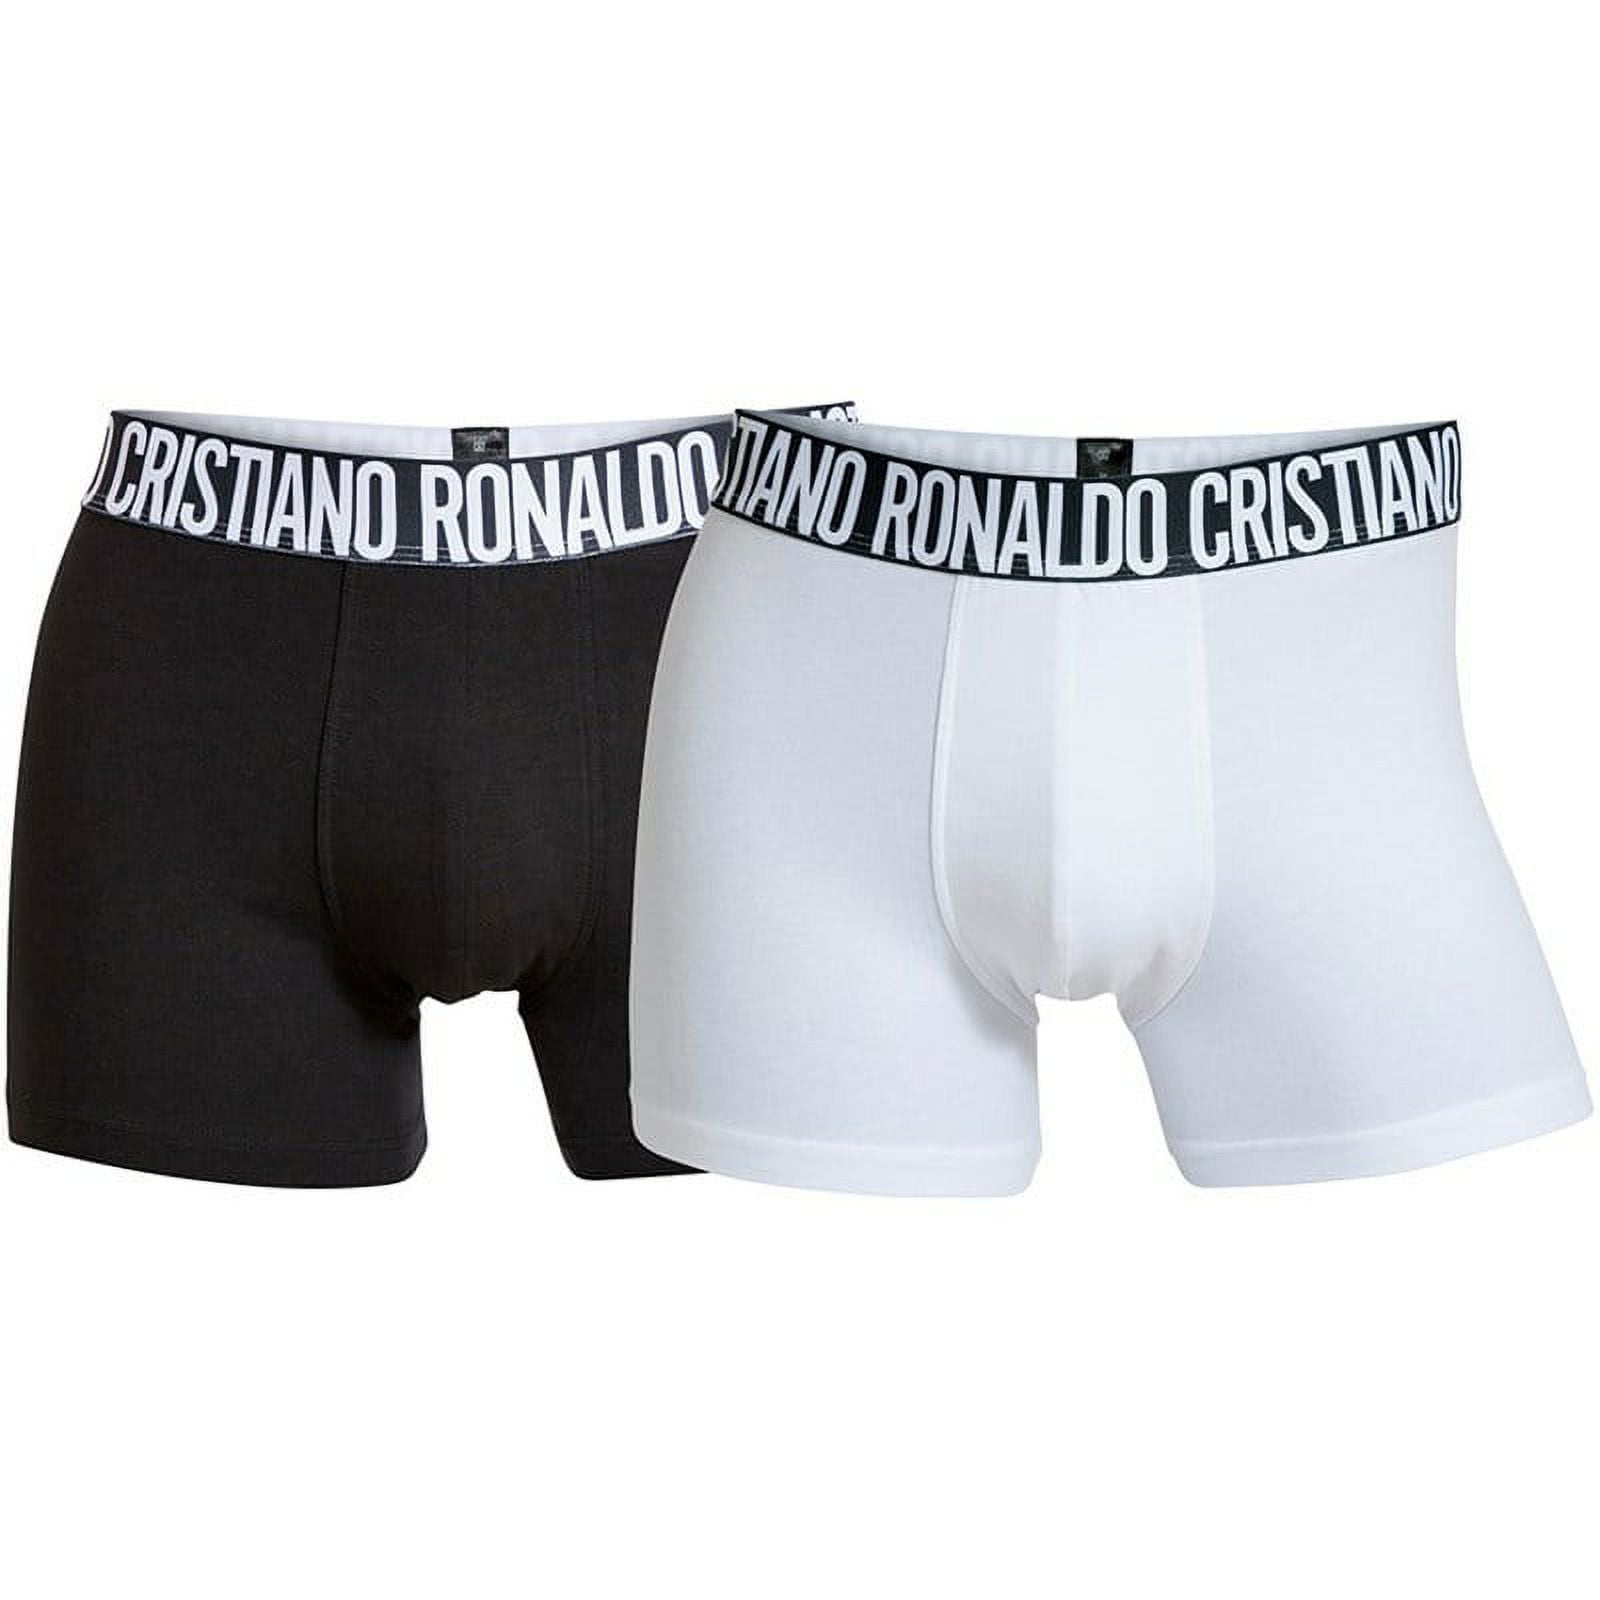 CR7 by Cristiano Ronaldo Men's Trunk 3-pack 